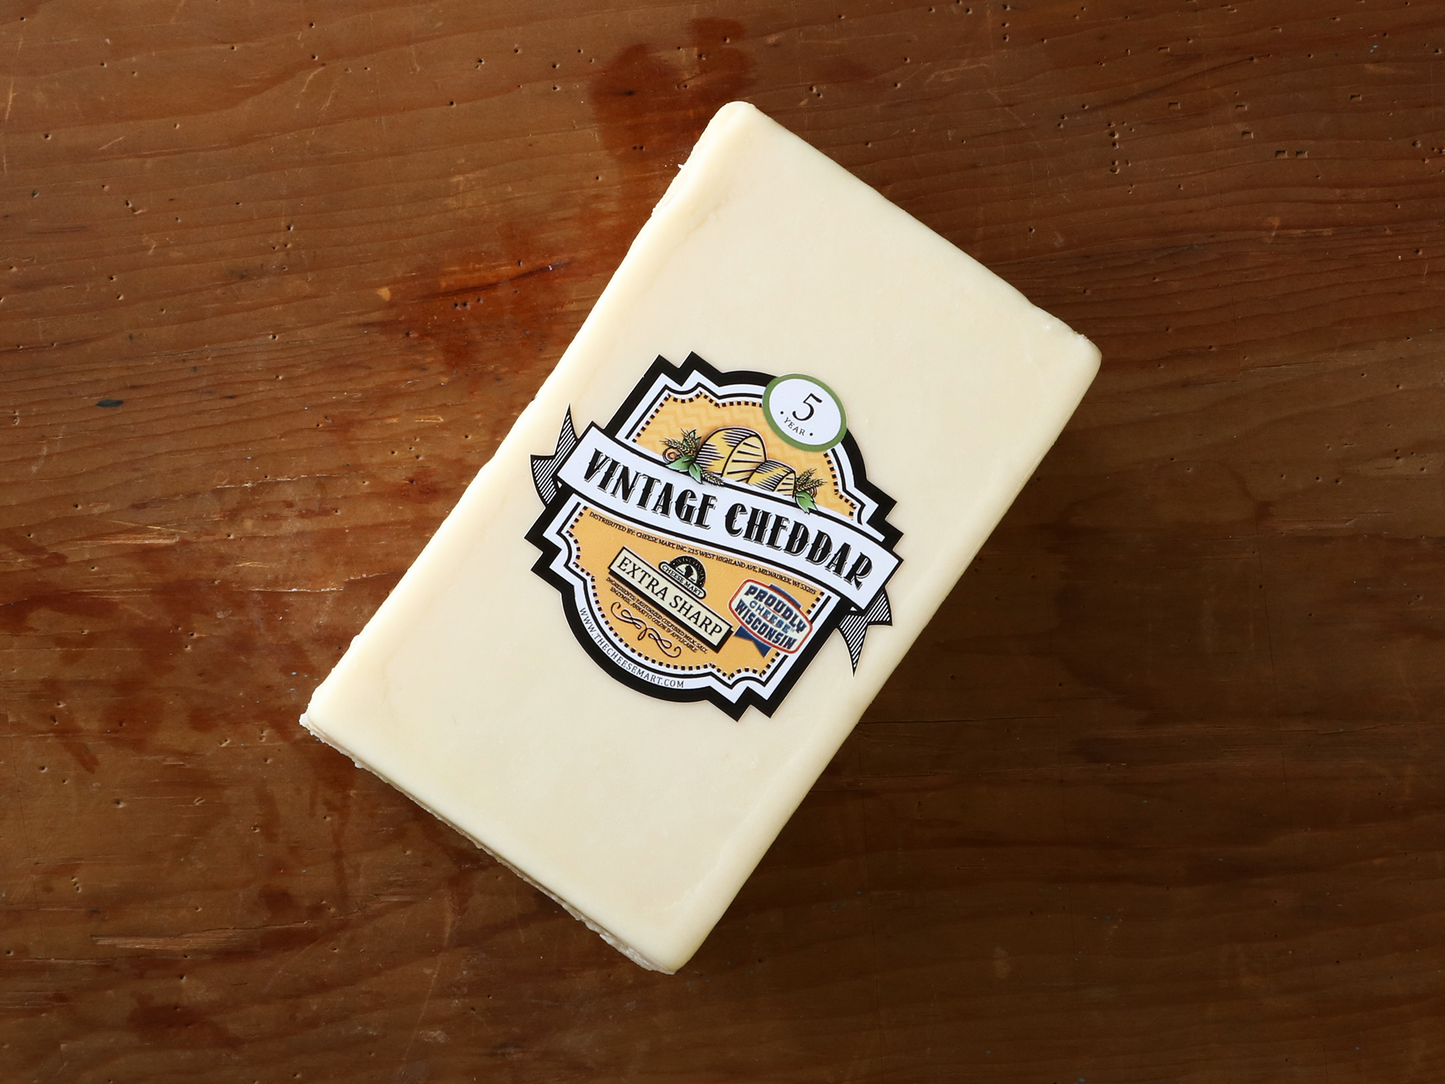 Cheddar Cheese 5 Year Vintage White